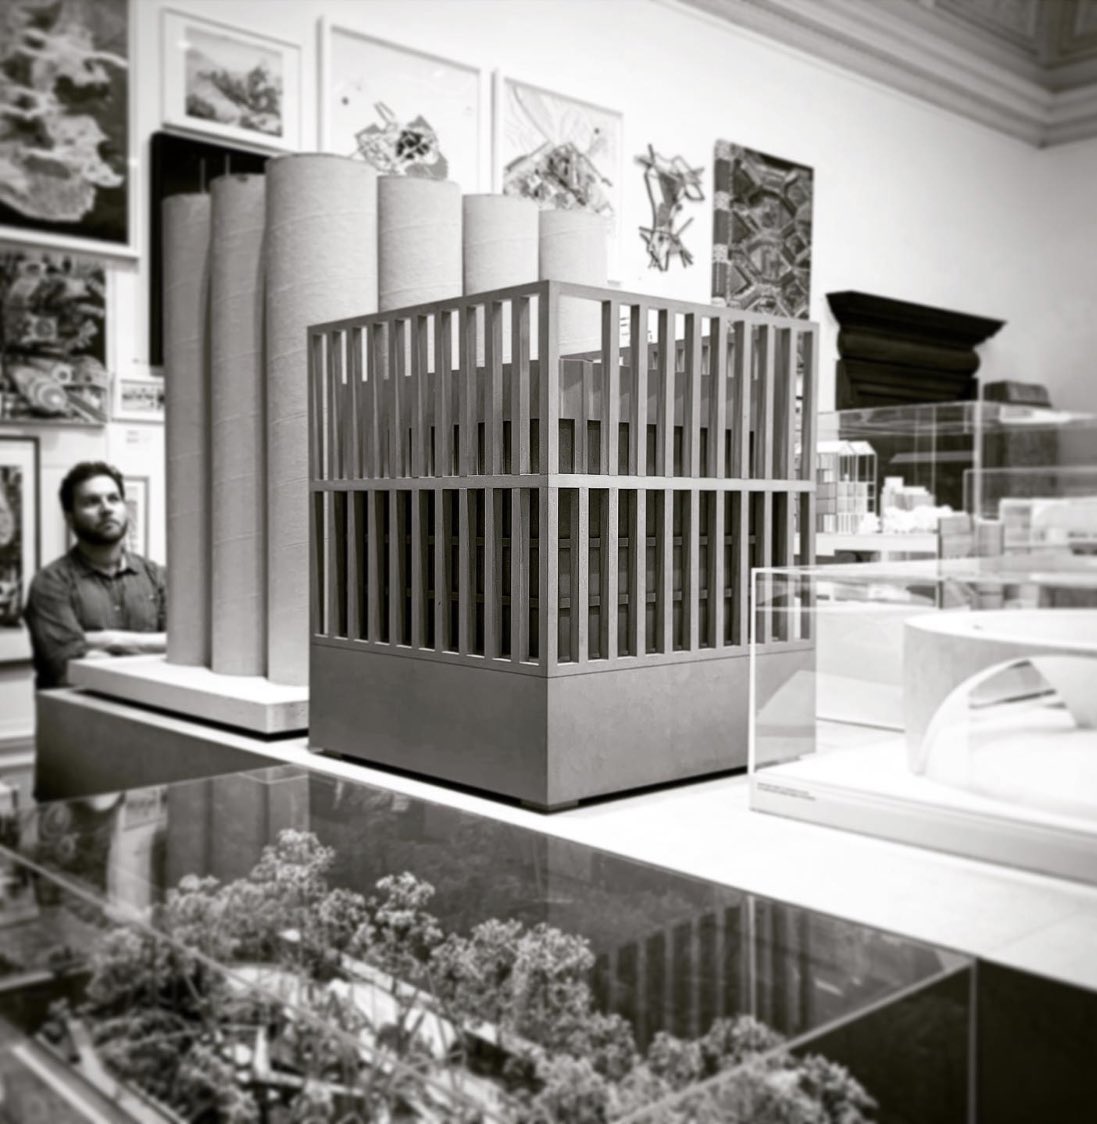 Our Whitechapel Square Fragment in-situ at the @royalacademyarts Royal Academy Summer Exhibition. Very proud of our work and our team. #hutchinsonandpartners #fragments #whitechapel #whitechapelsquare #sustainableurbanism #royalacademyofartssummerexhibition